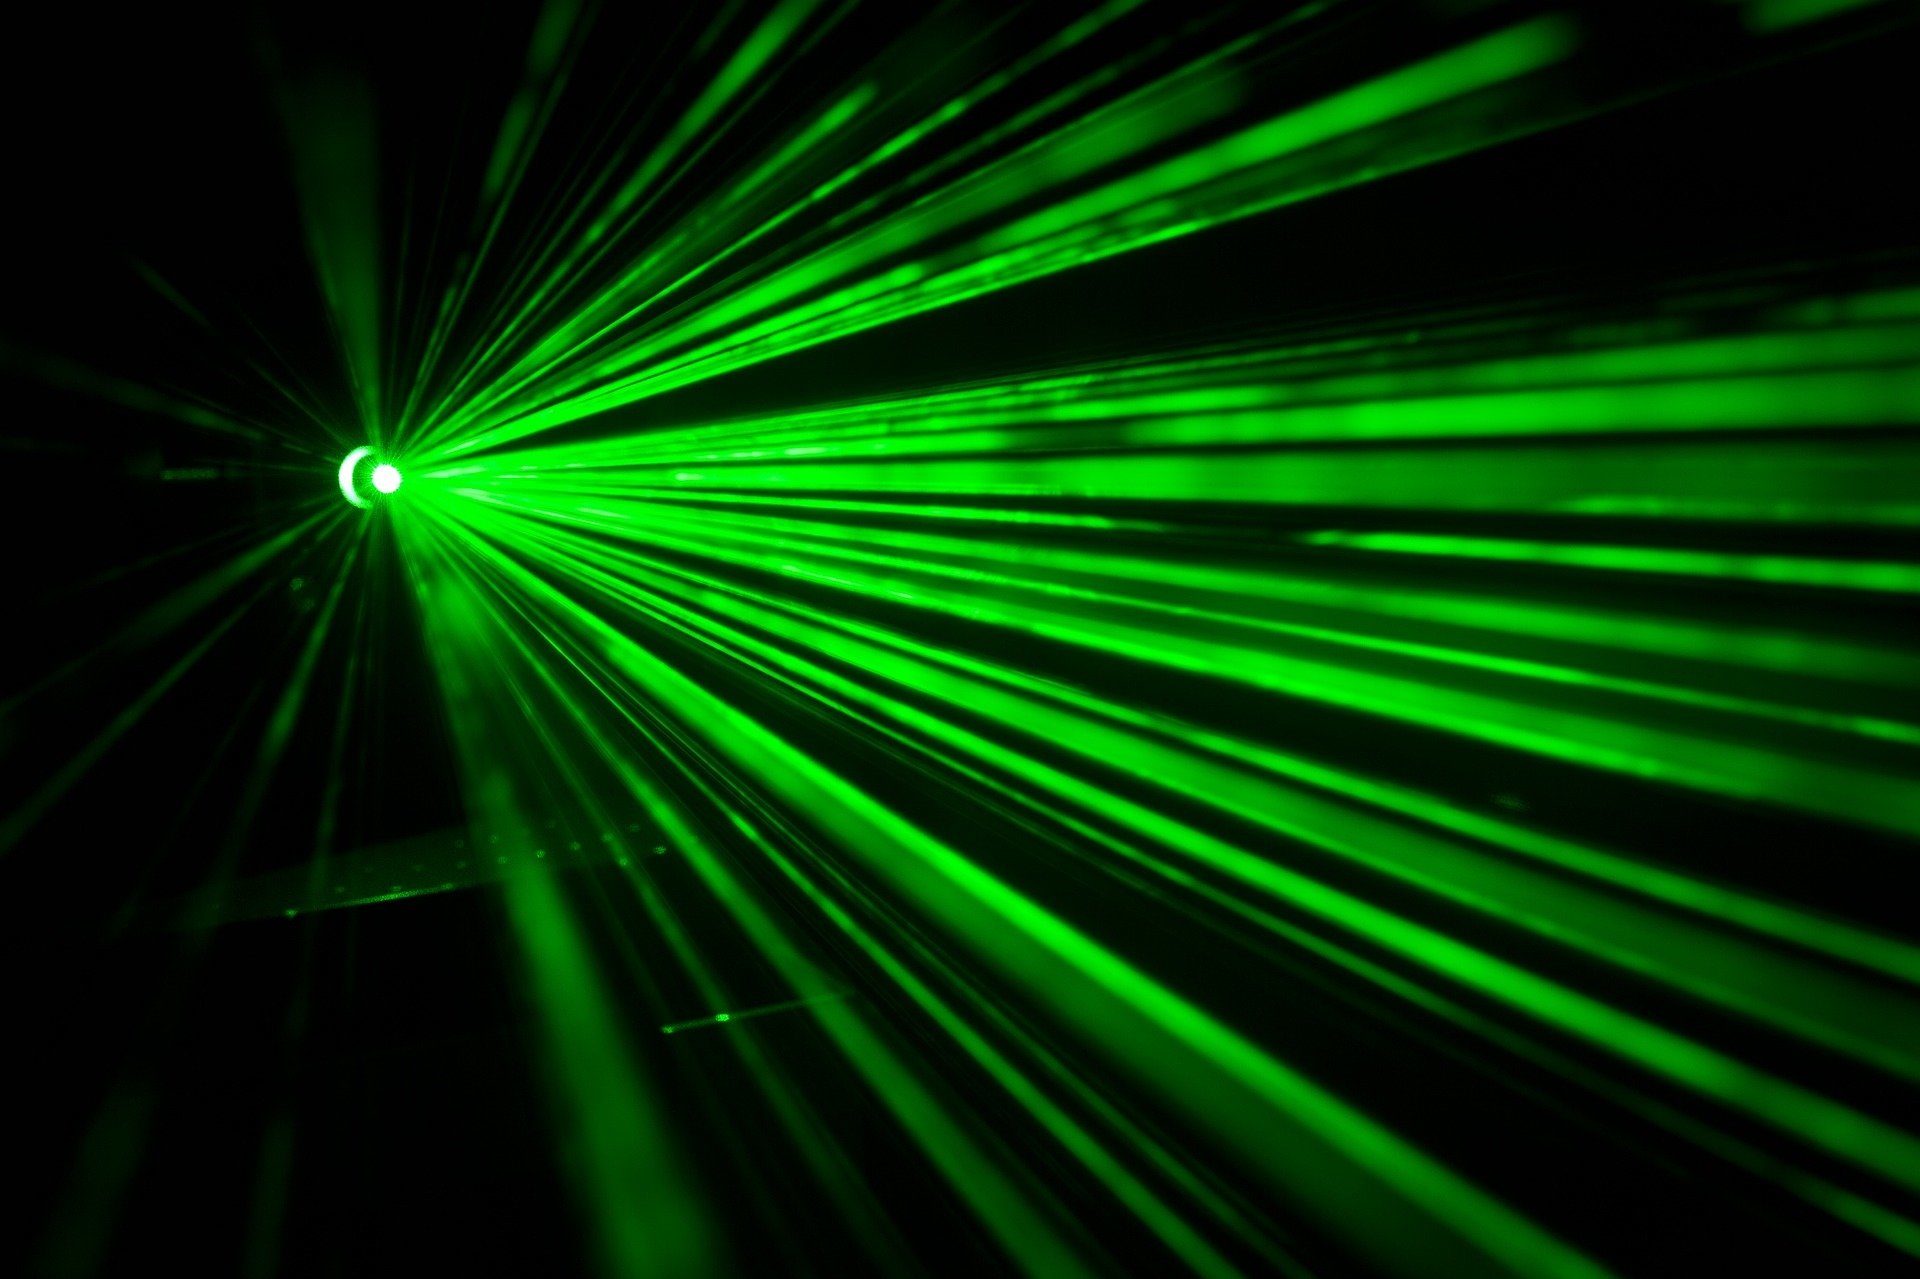 Directed Lasers